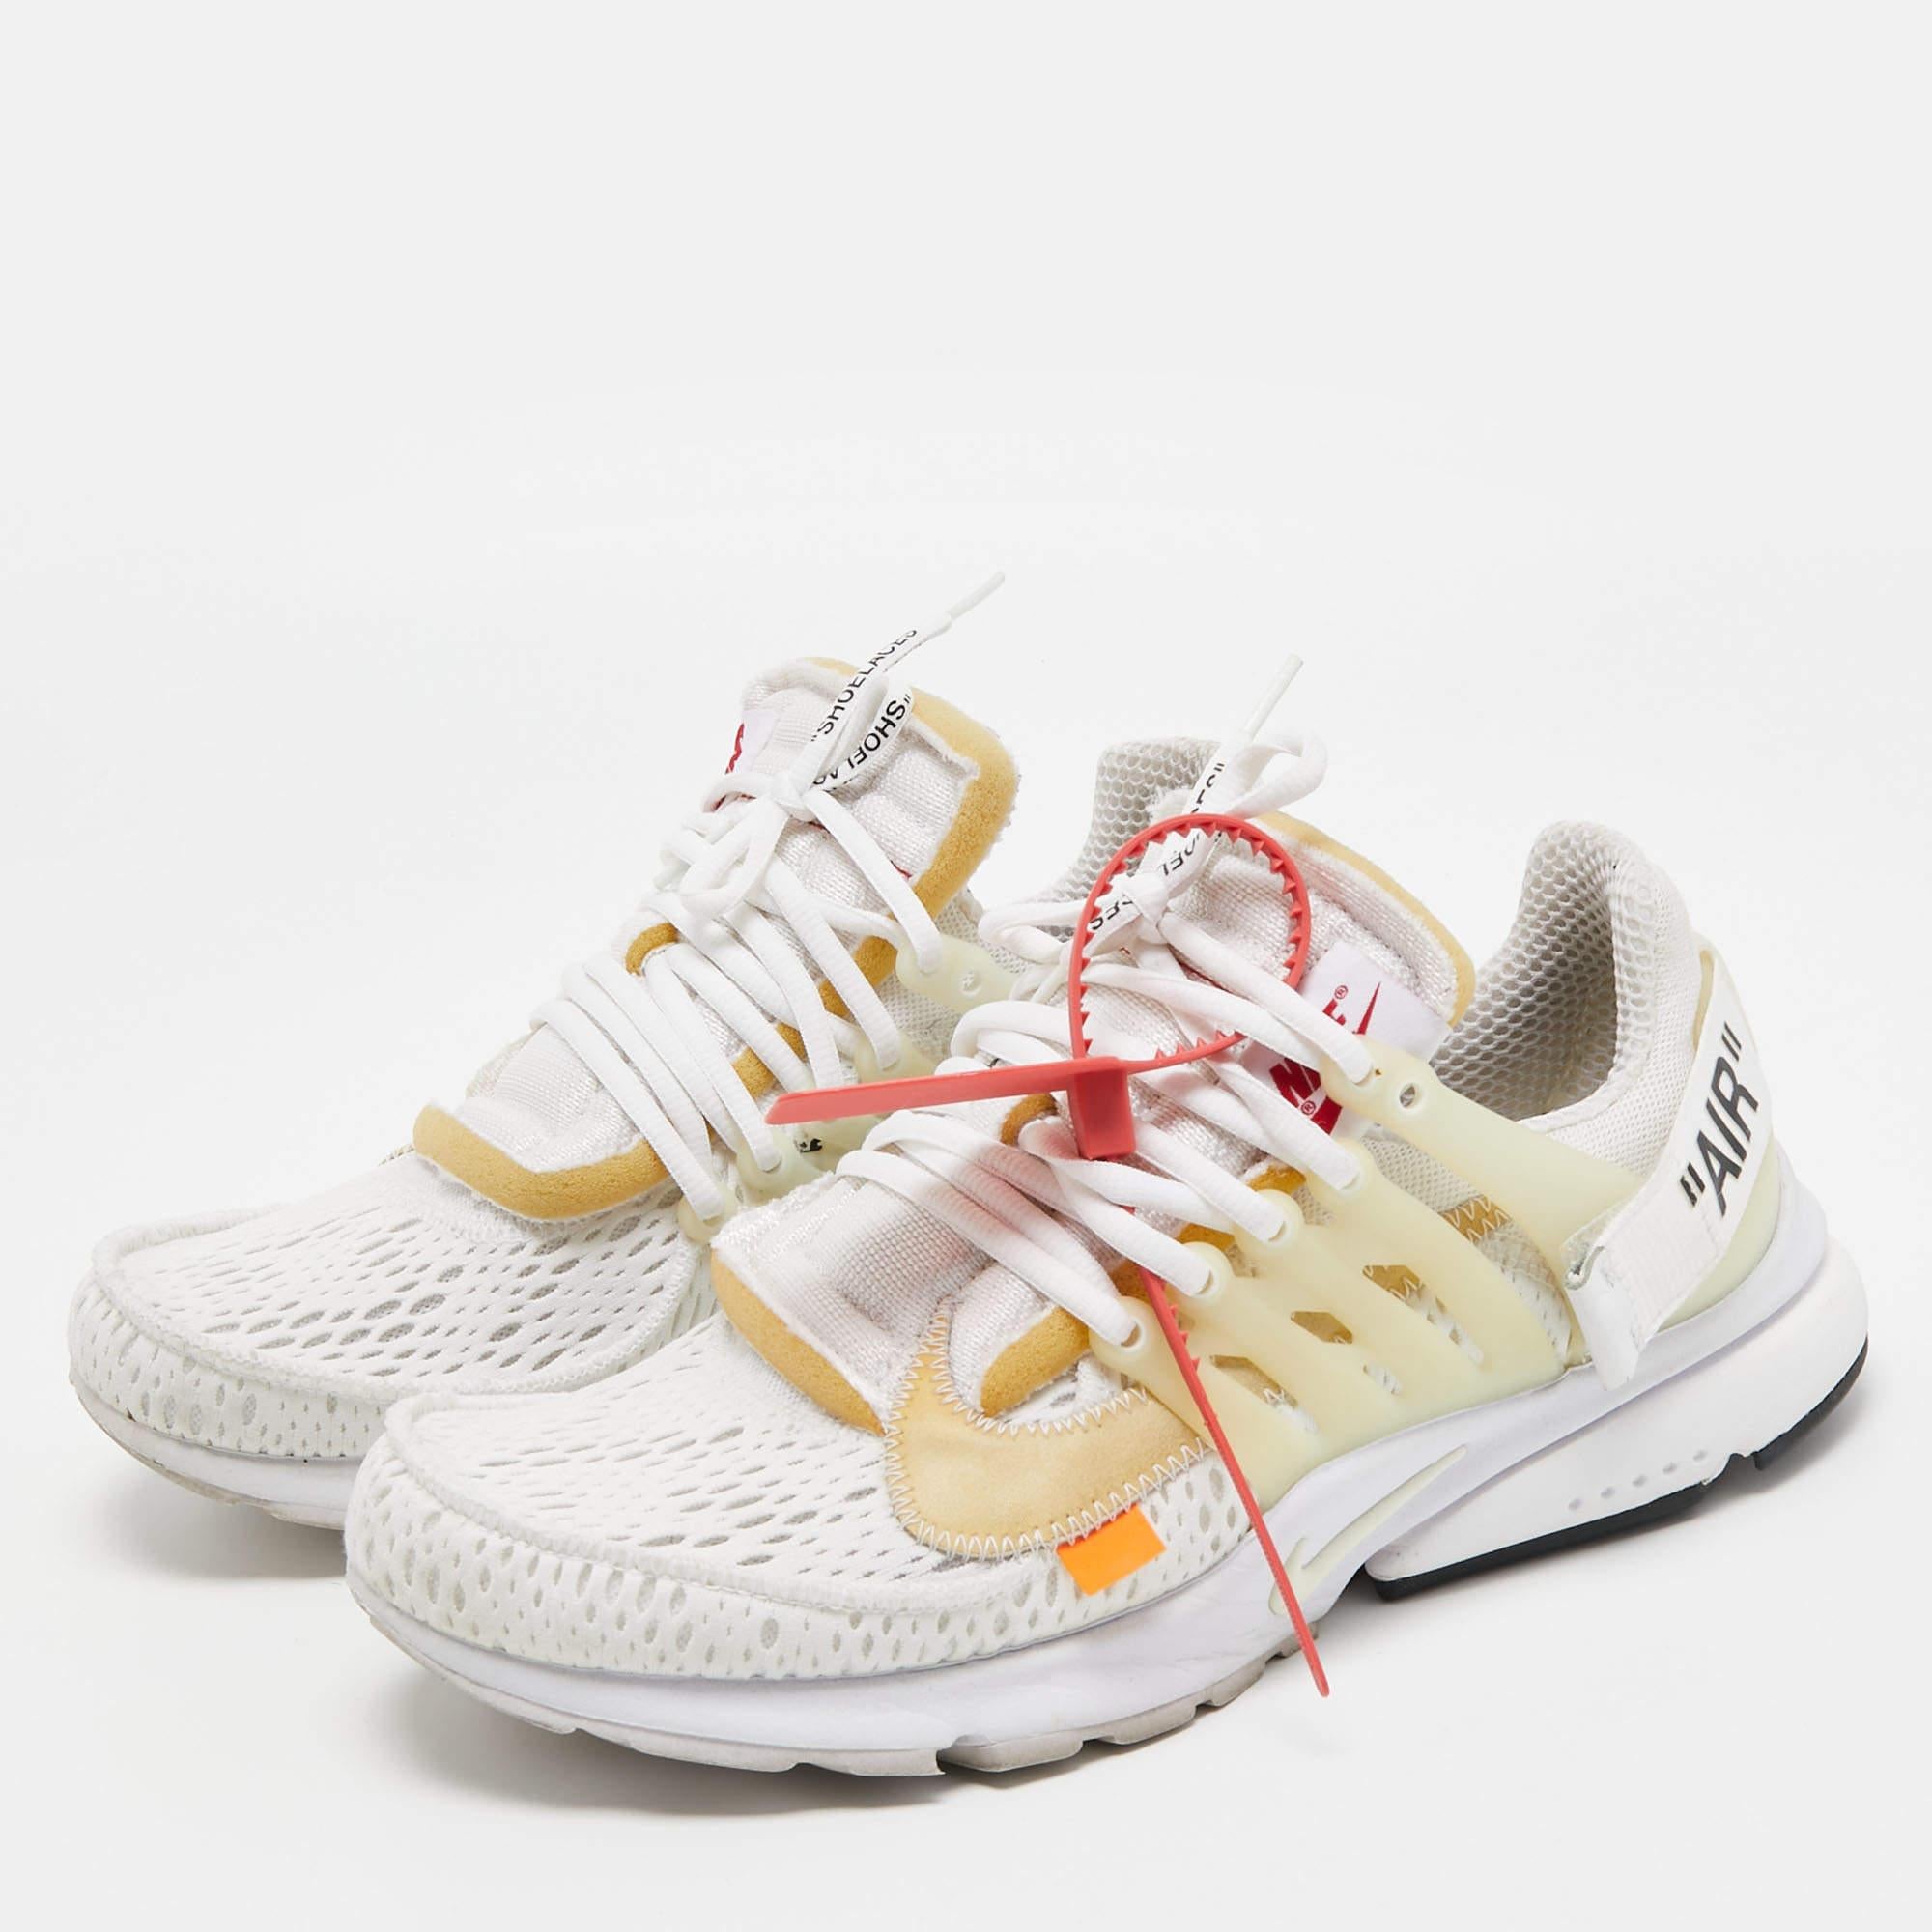 Nike x Off White White Fabric Air Presto Low Trainers Sneakers Size 42.5 For Sale 2